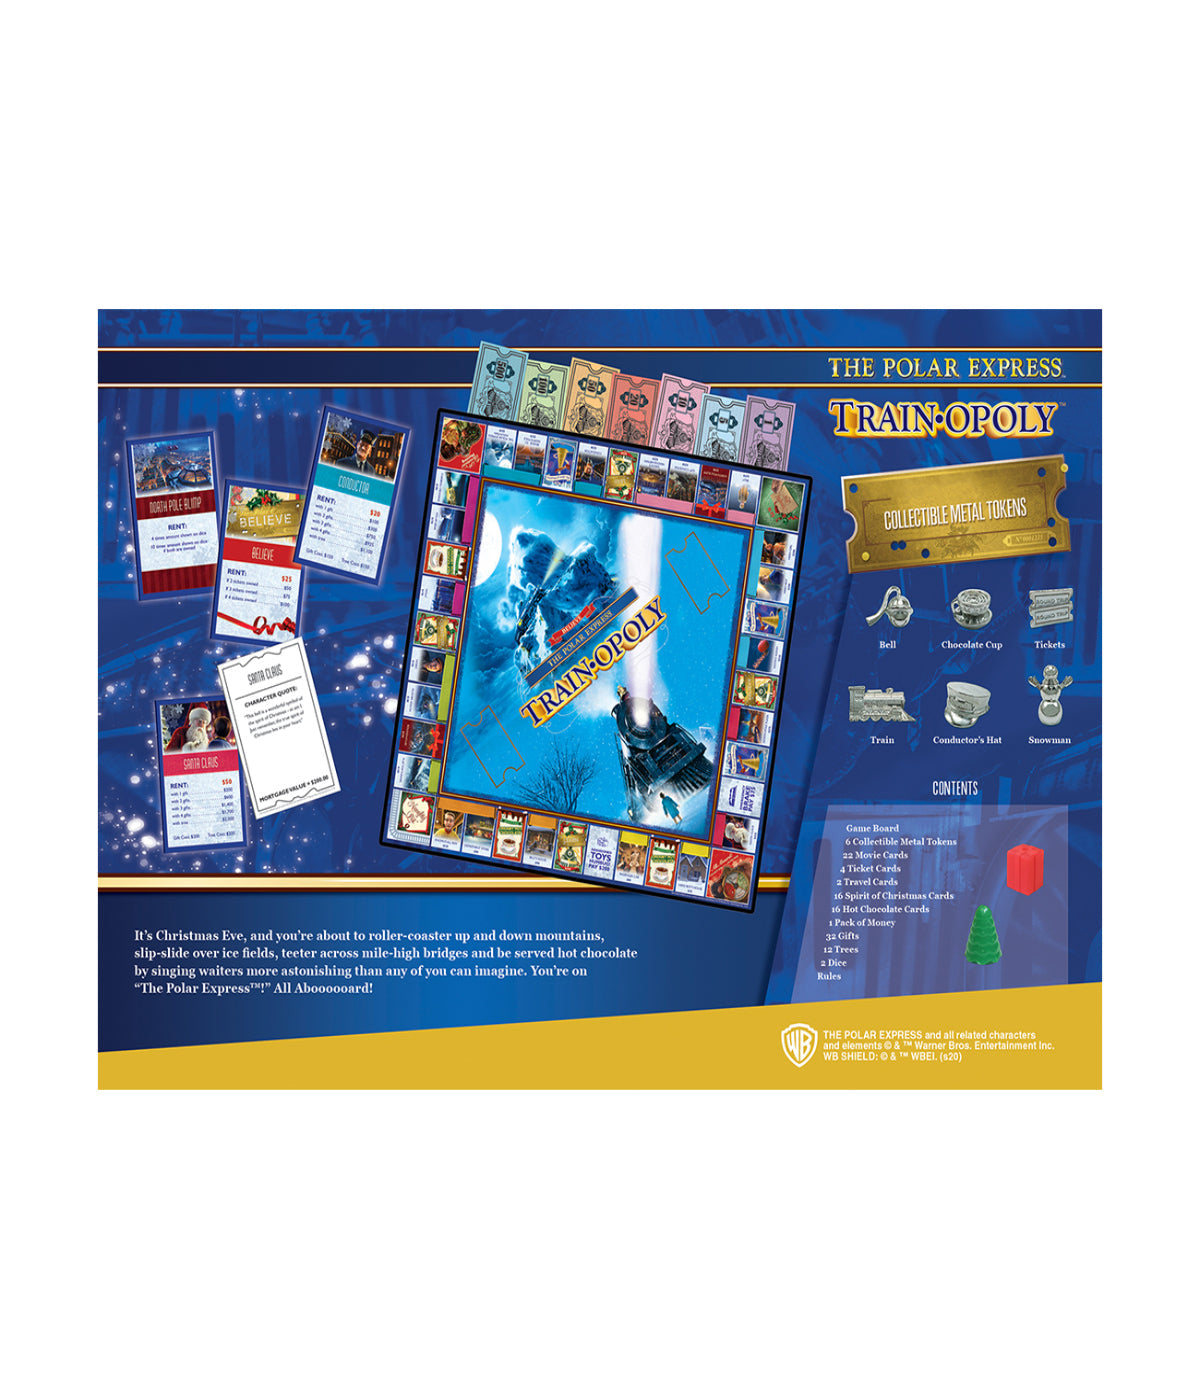 The Polar Express - Train-Opoly Collector's Edition Set Multi